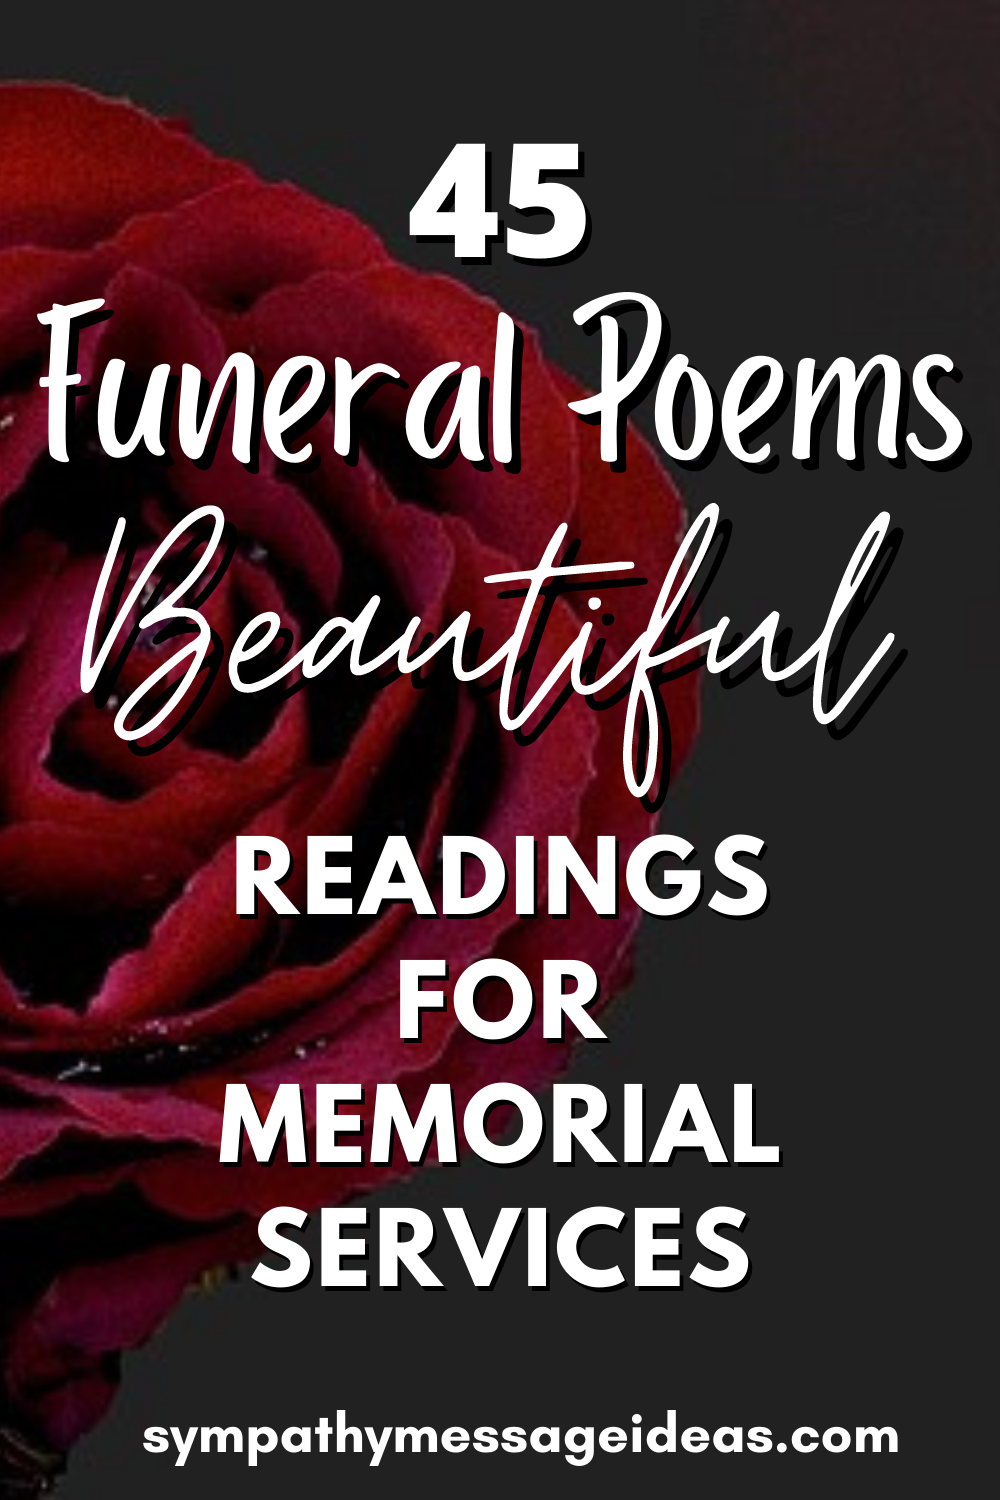 Funeral Poems 45 Beautiful Readings For Memorial Services Sympathy